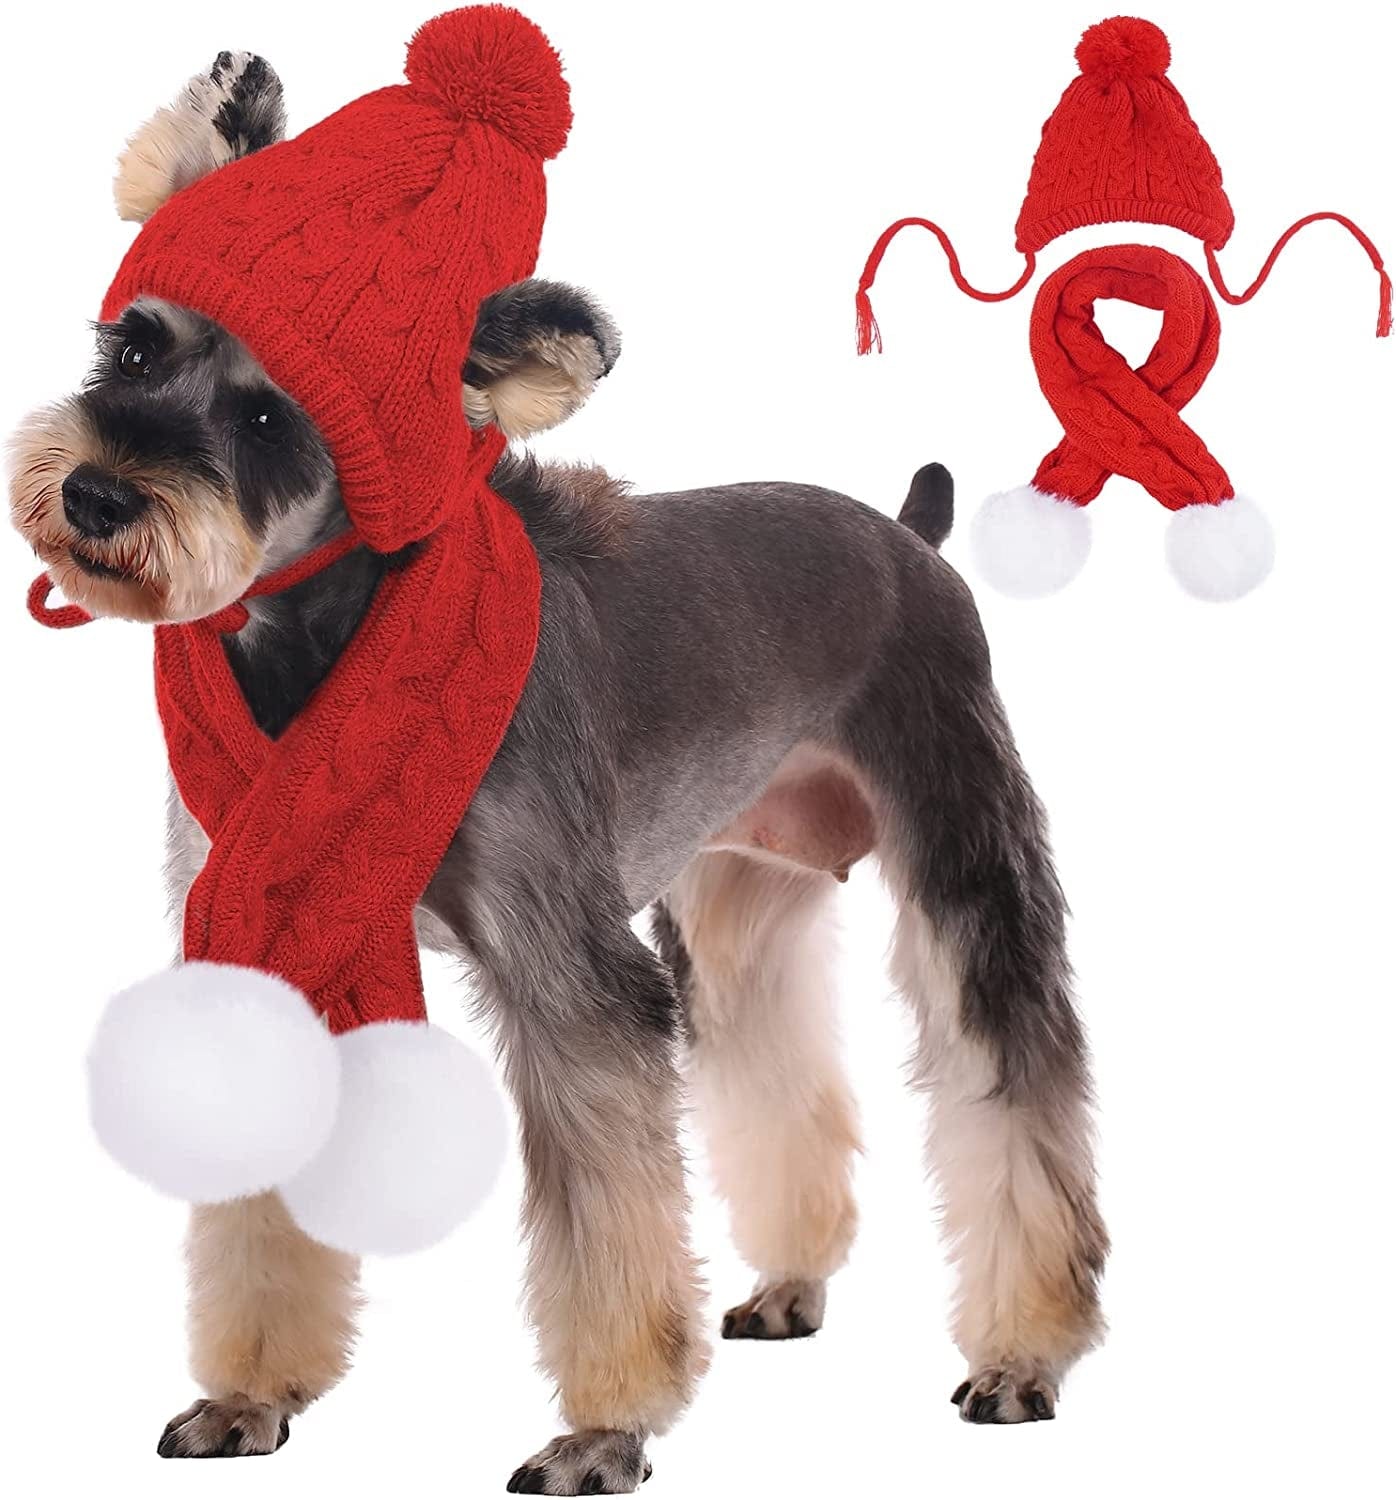 Dog Hat & Scarf Set, Dog Knitted Hat Pet Christmas Winter Warm